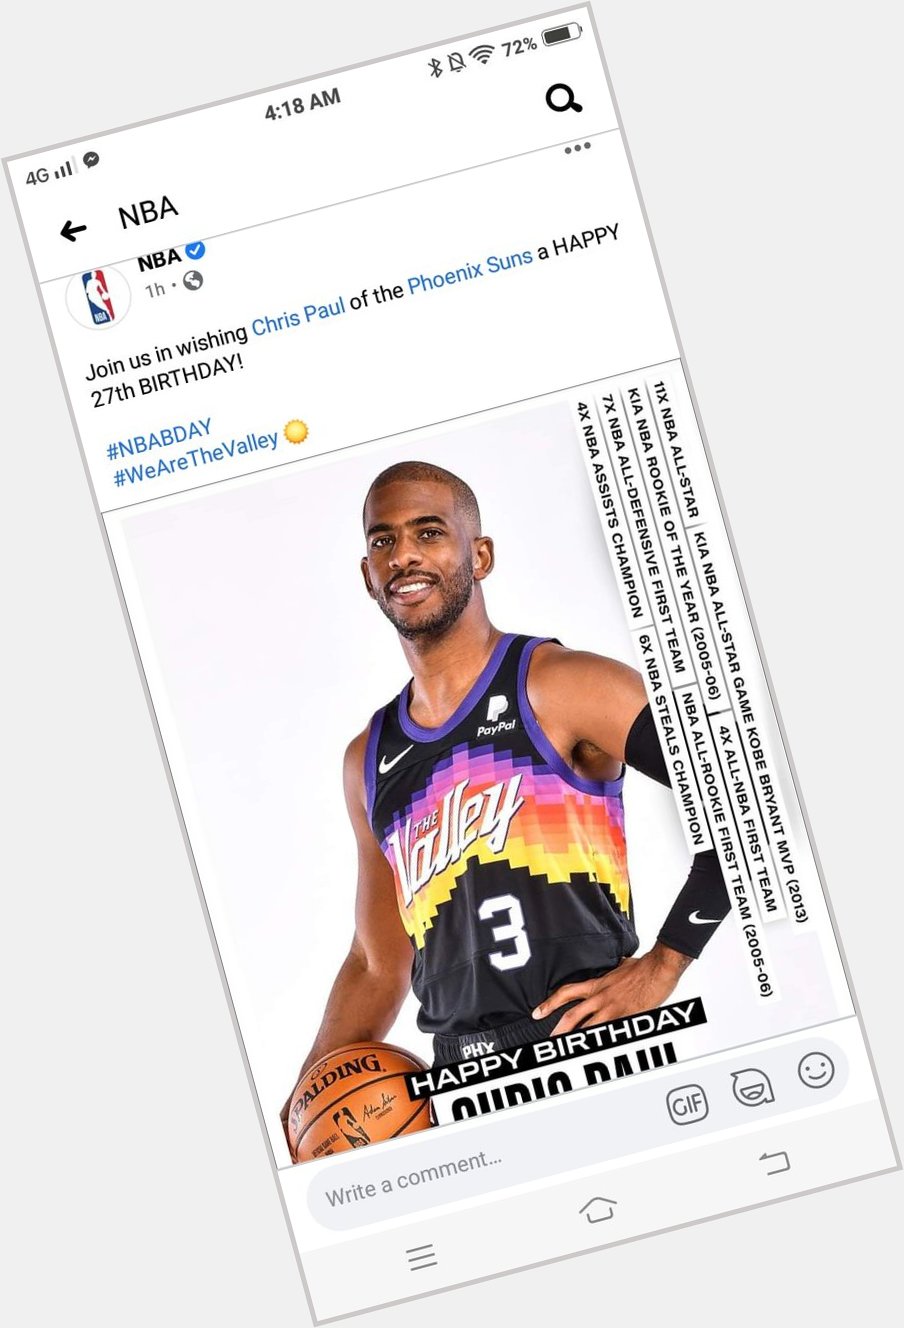 Chris Paul playing so good that the NBA page thought he\s stil 27. . Happy birthday 